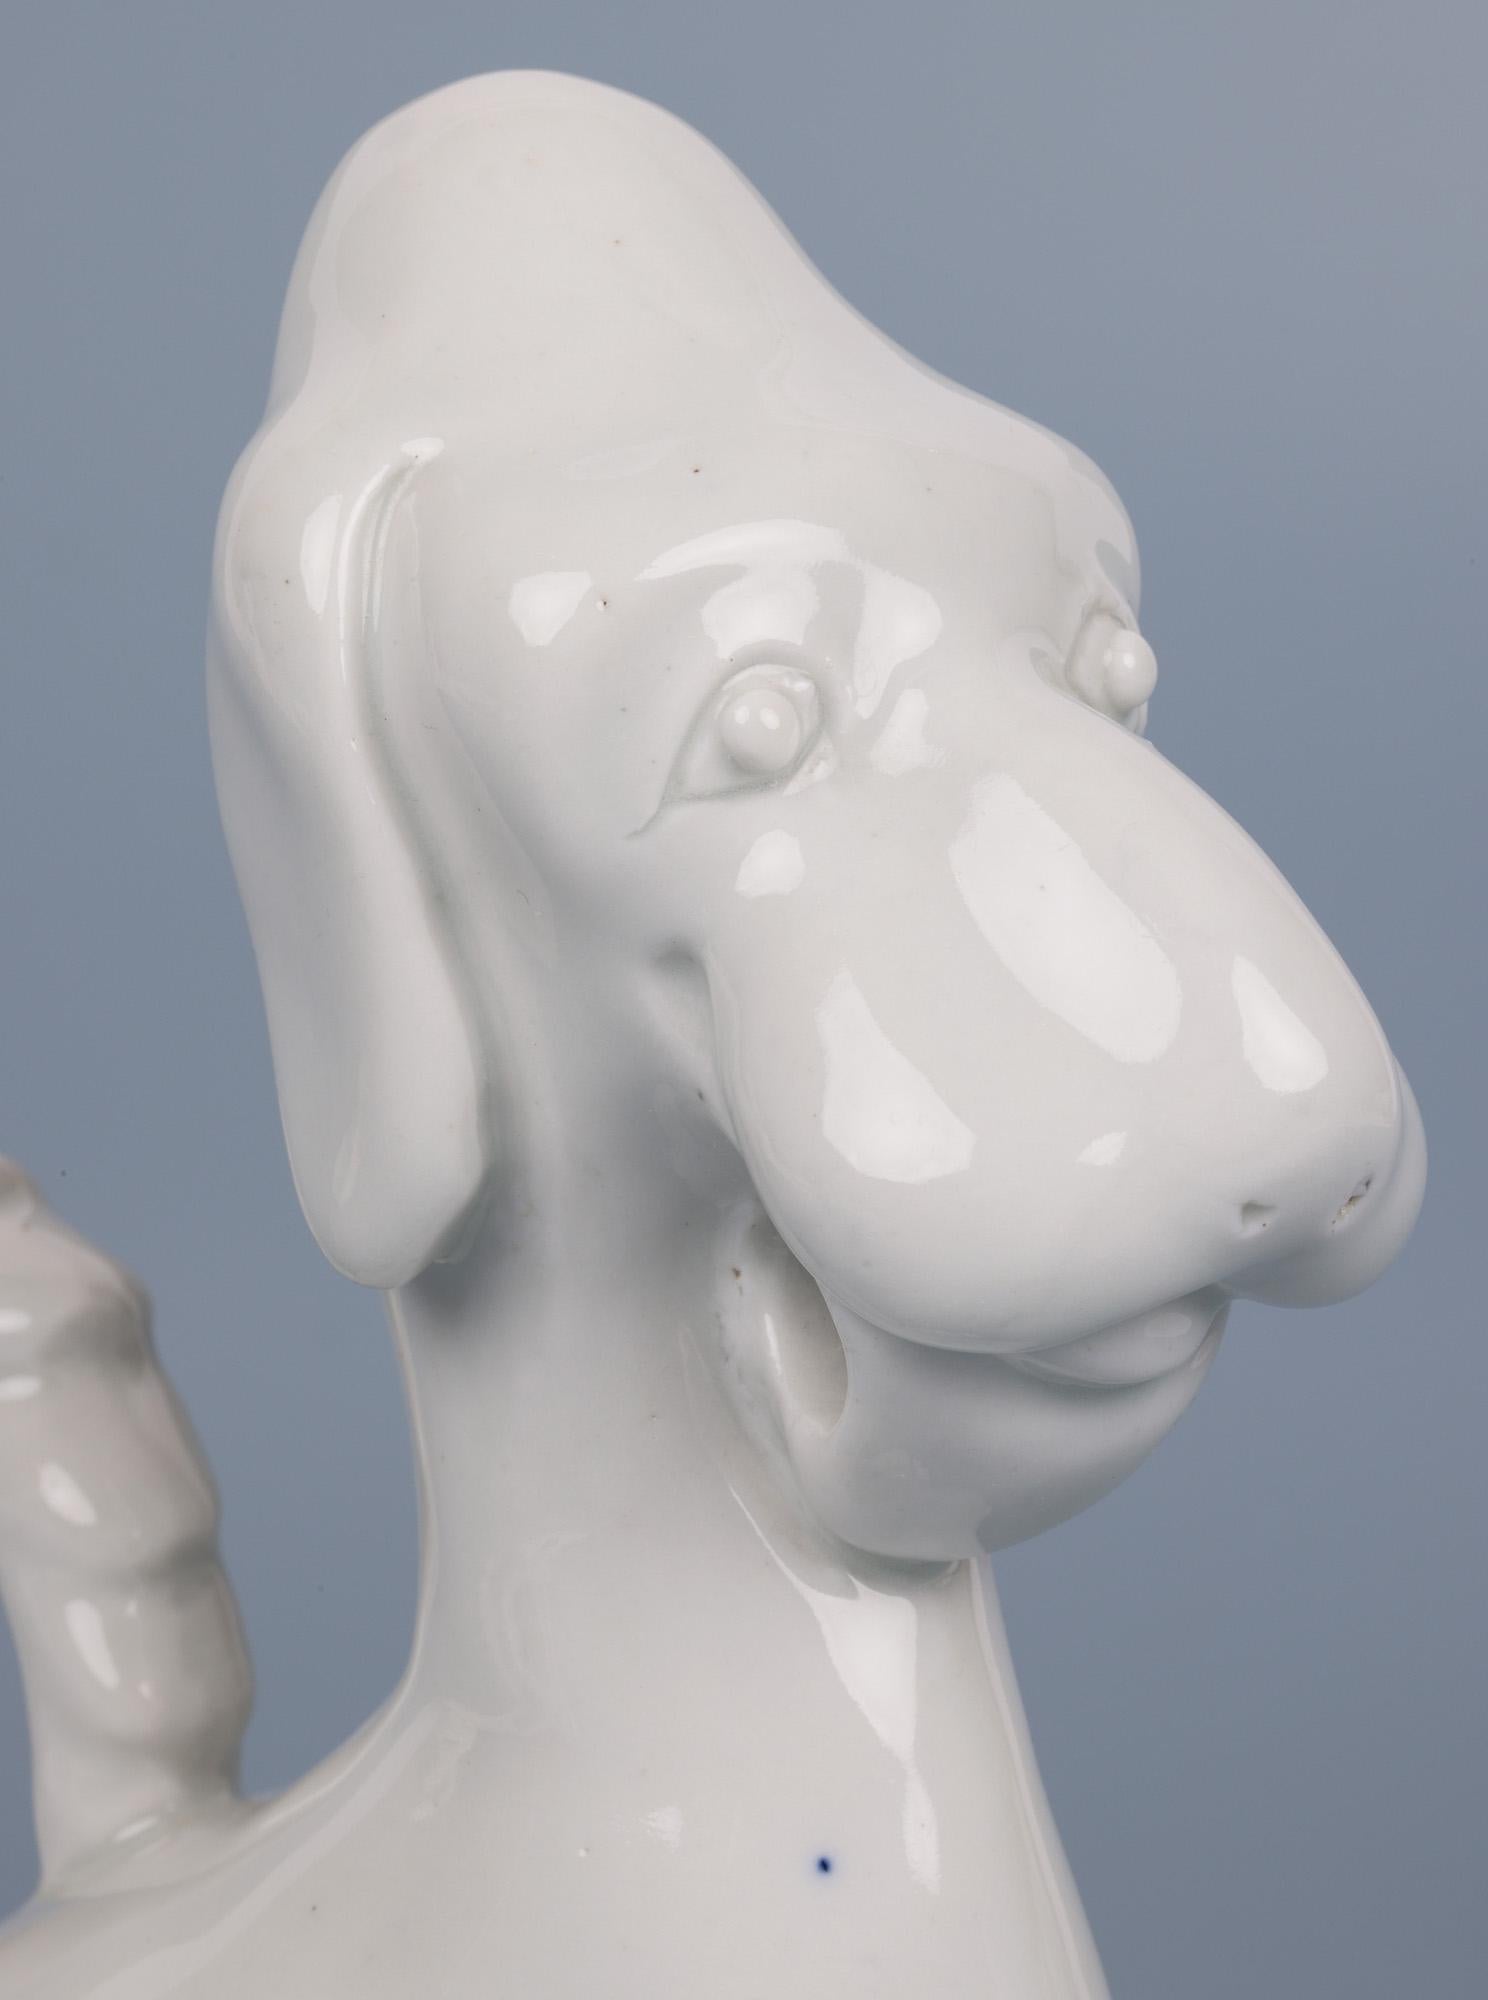 A fine Japanese attributed Blanc De Chine porcelain model of a amusing stylized dog dating from the early 20th century. This interesting figure is modelled as a seated dog with its tail looped and forming a handle and with an open loop below its